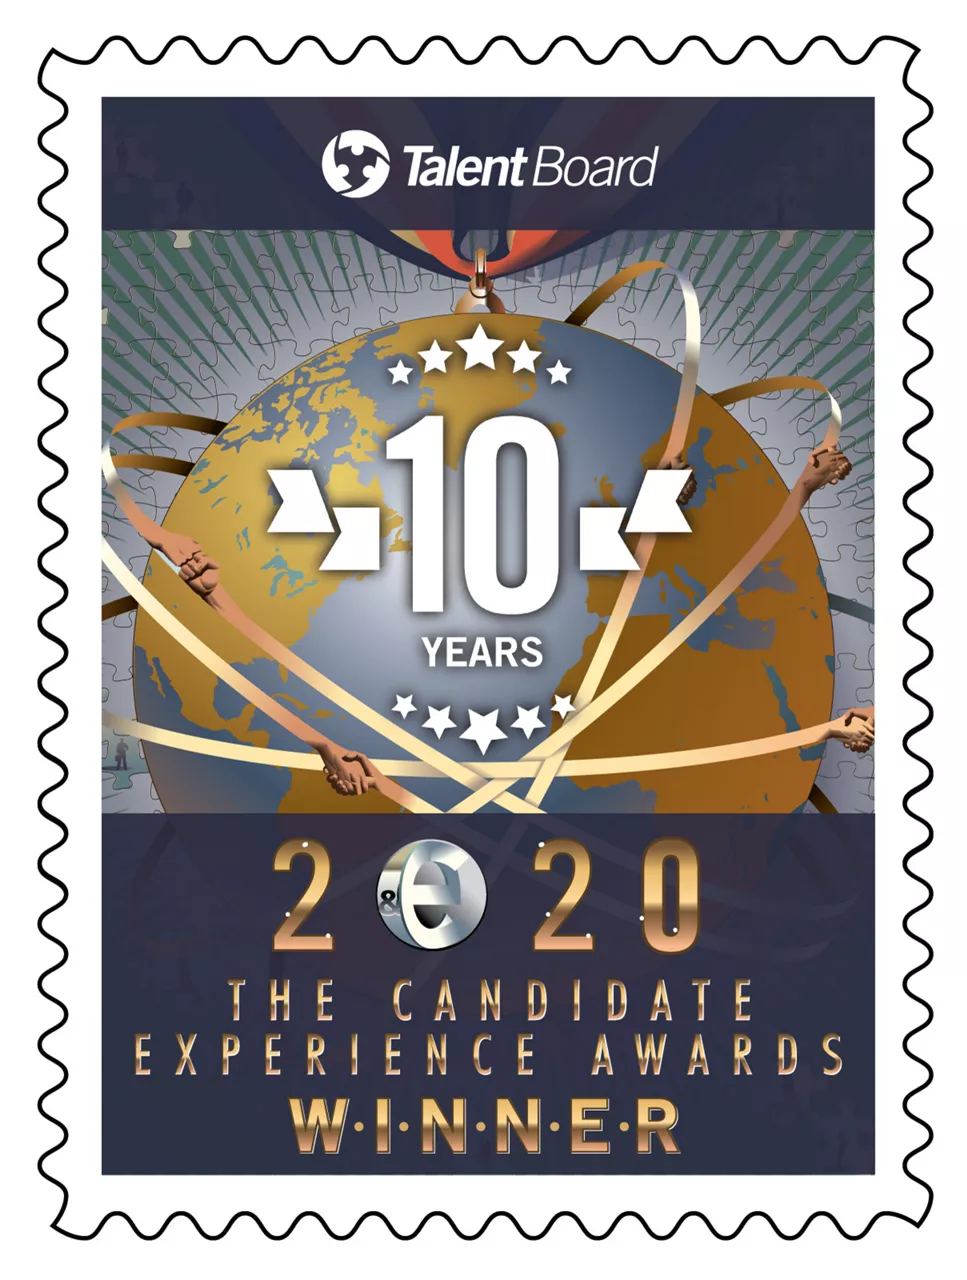 Virtusa Named a Winner in the 2020 Candidate Experience Awards by Talent Board